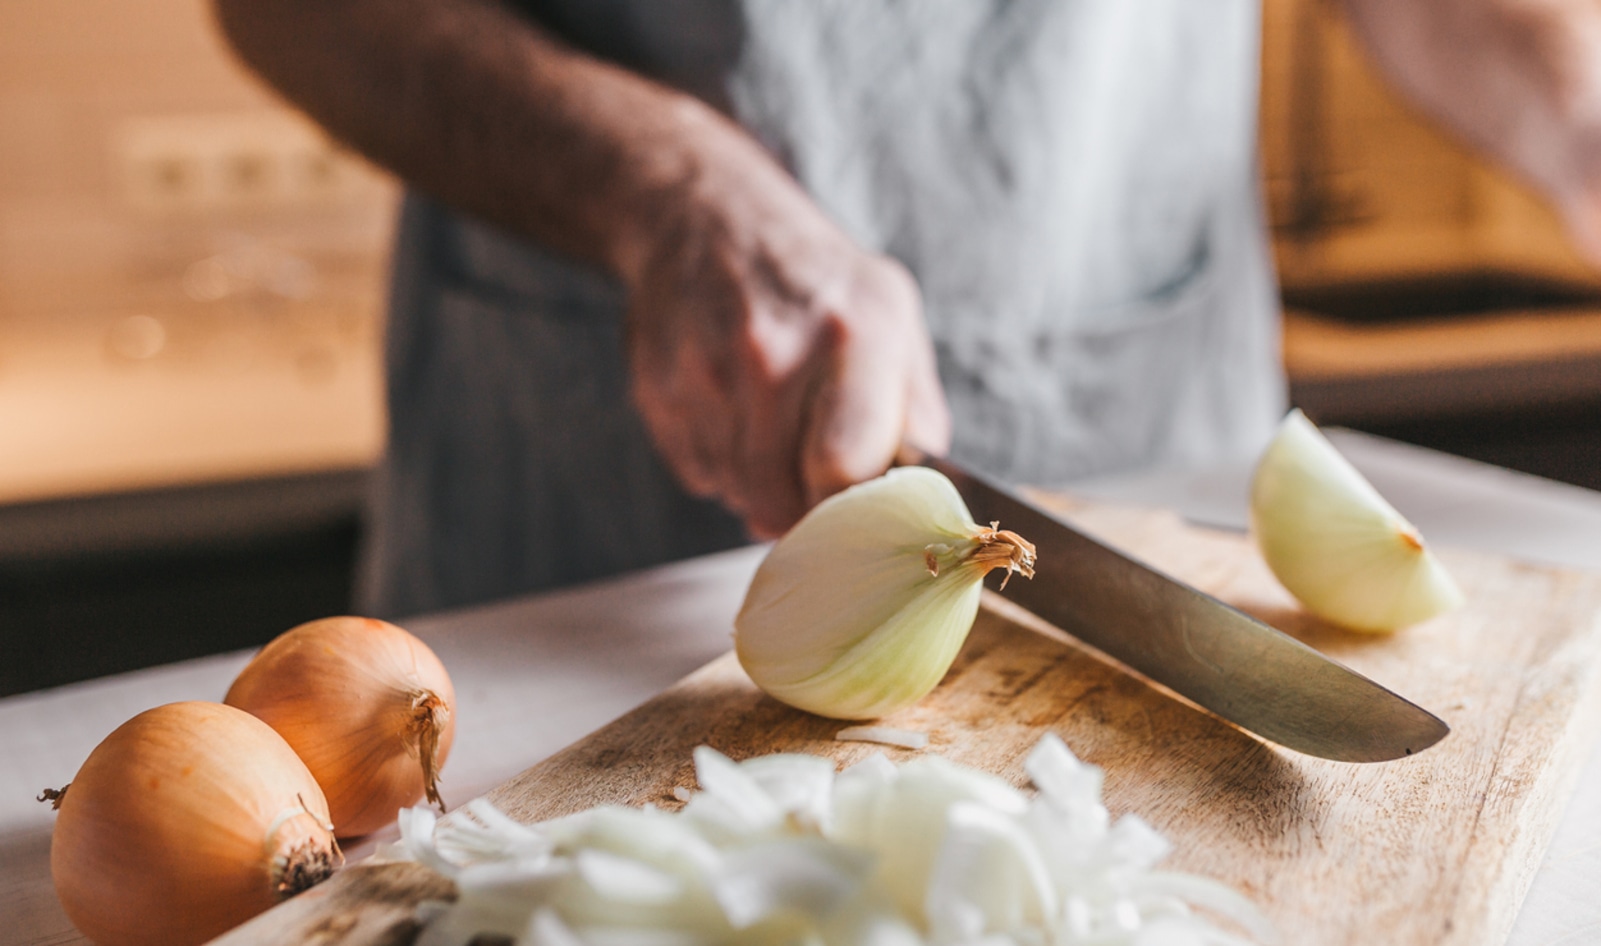 Onions: Vegetable or Herb? In a Way, They're Sort of Both